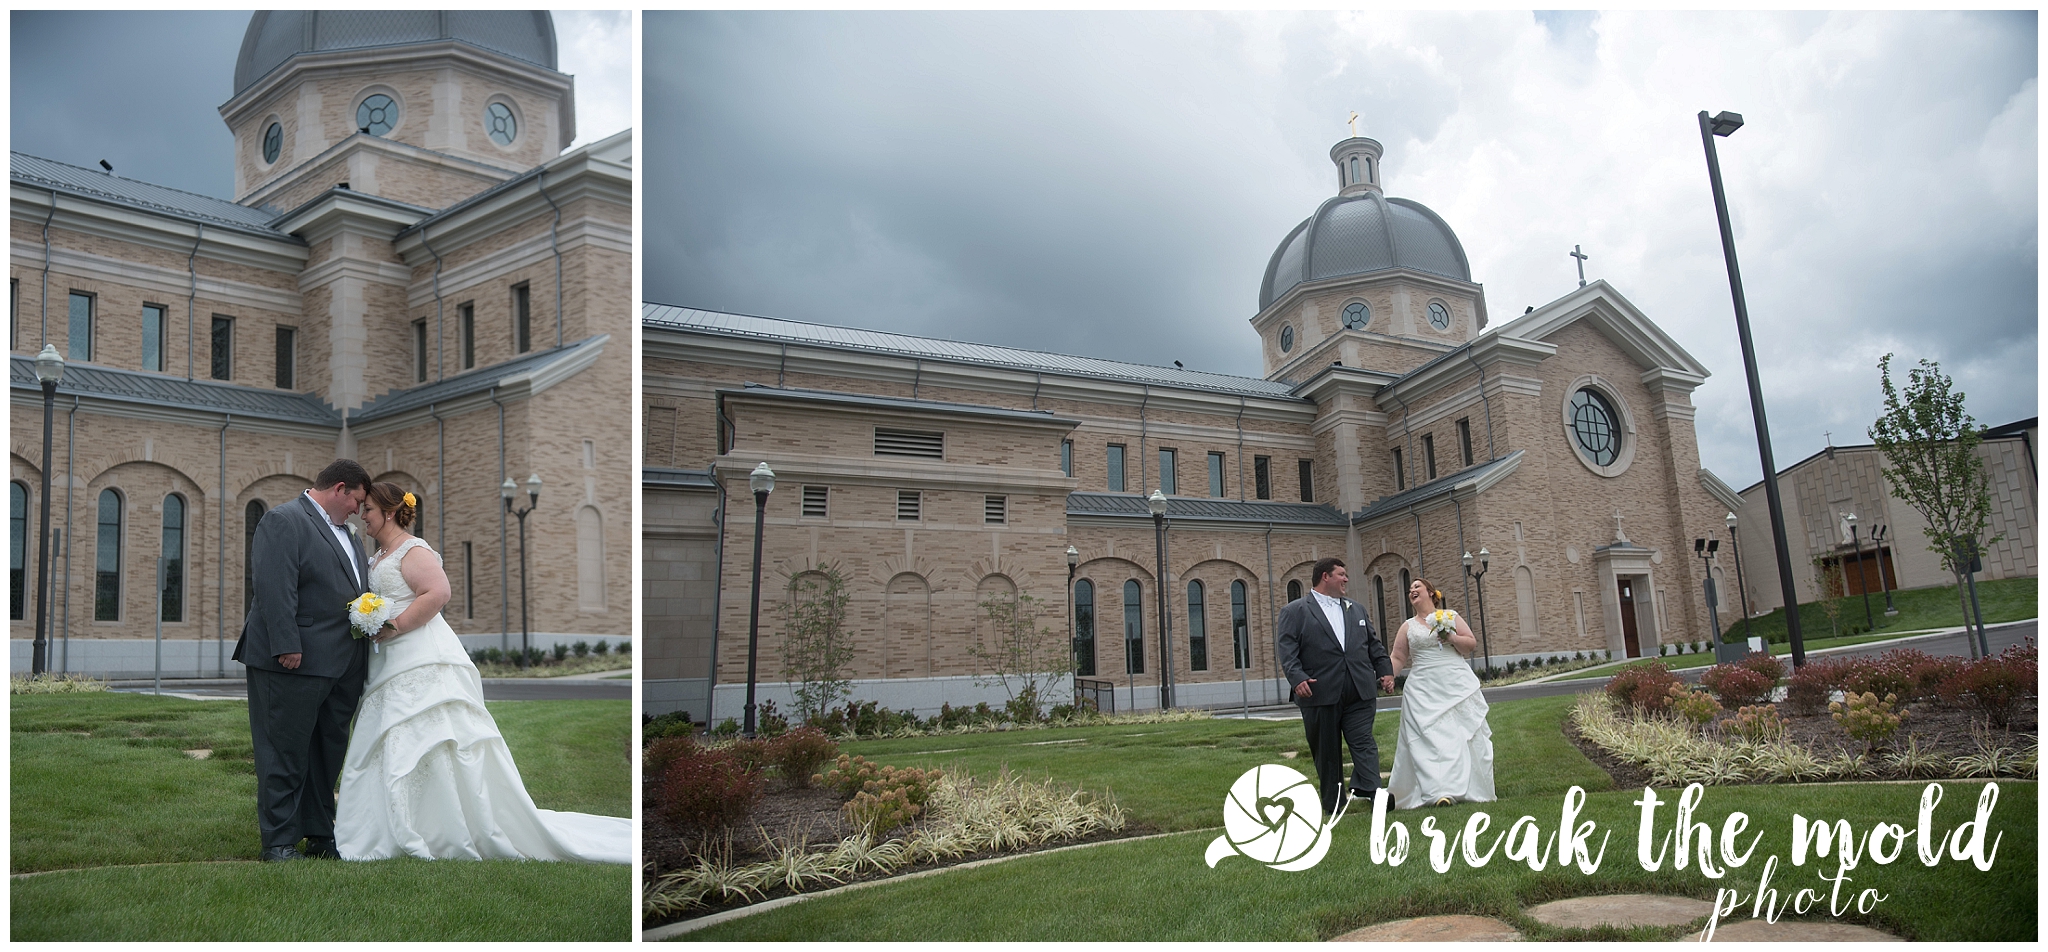 wedding-knoxville-sacred-heart-cathedral-photographer-break-the-mold-photo-feature-affordable_0810.jpg